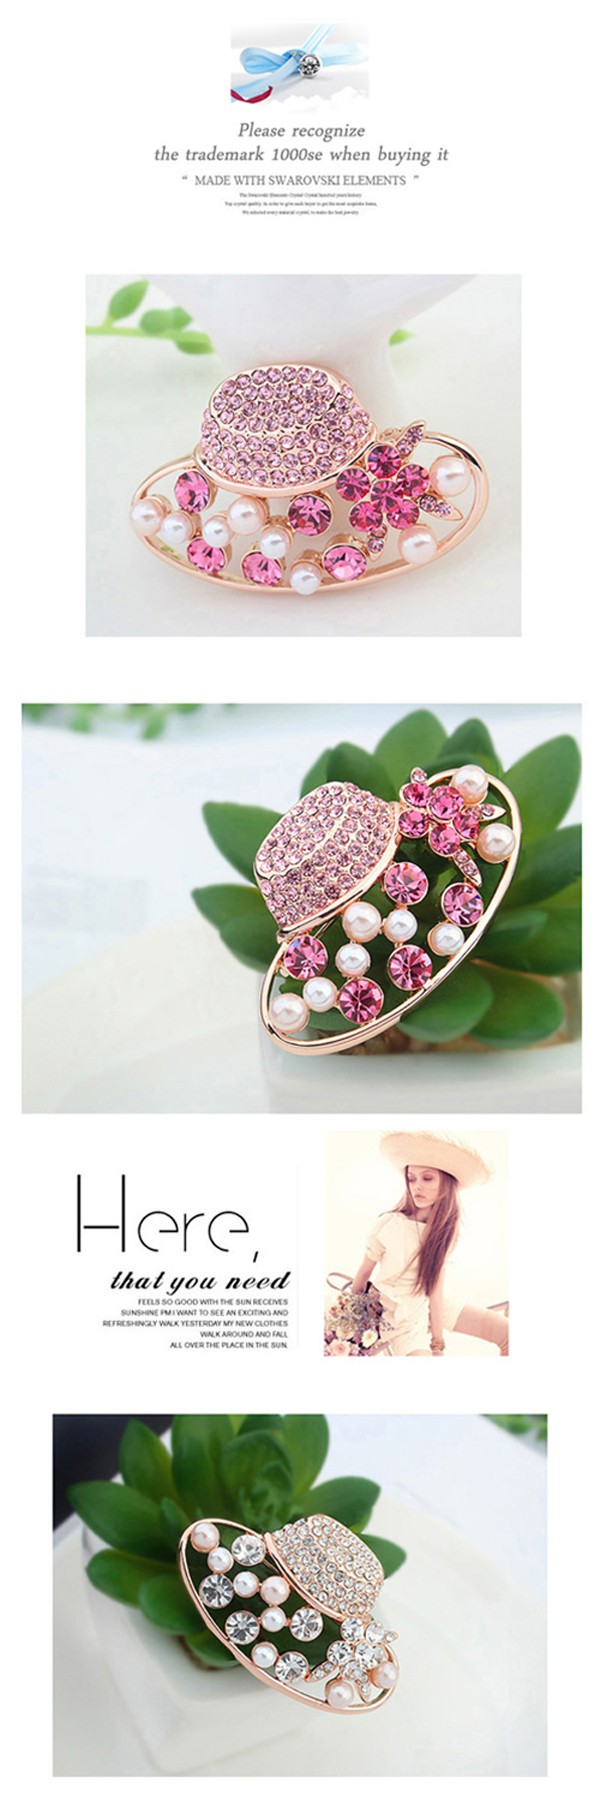 Concealed Light Plum Red & Rose Gold Diamond Decorated Hat Shape Design Alloy Crystal Brooches ,Crystal Brooches